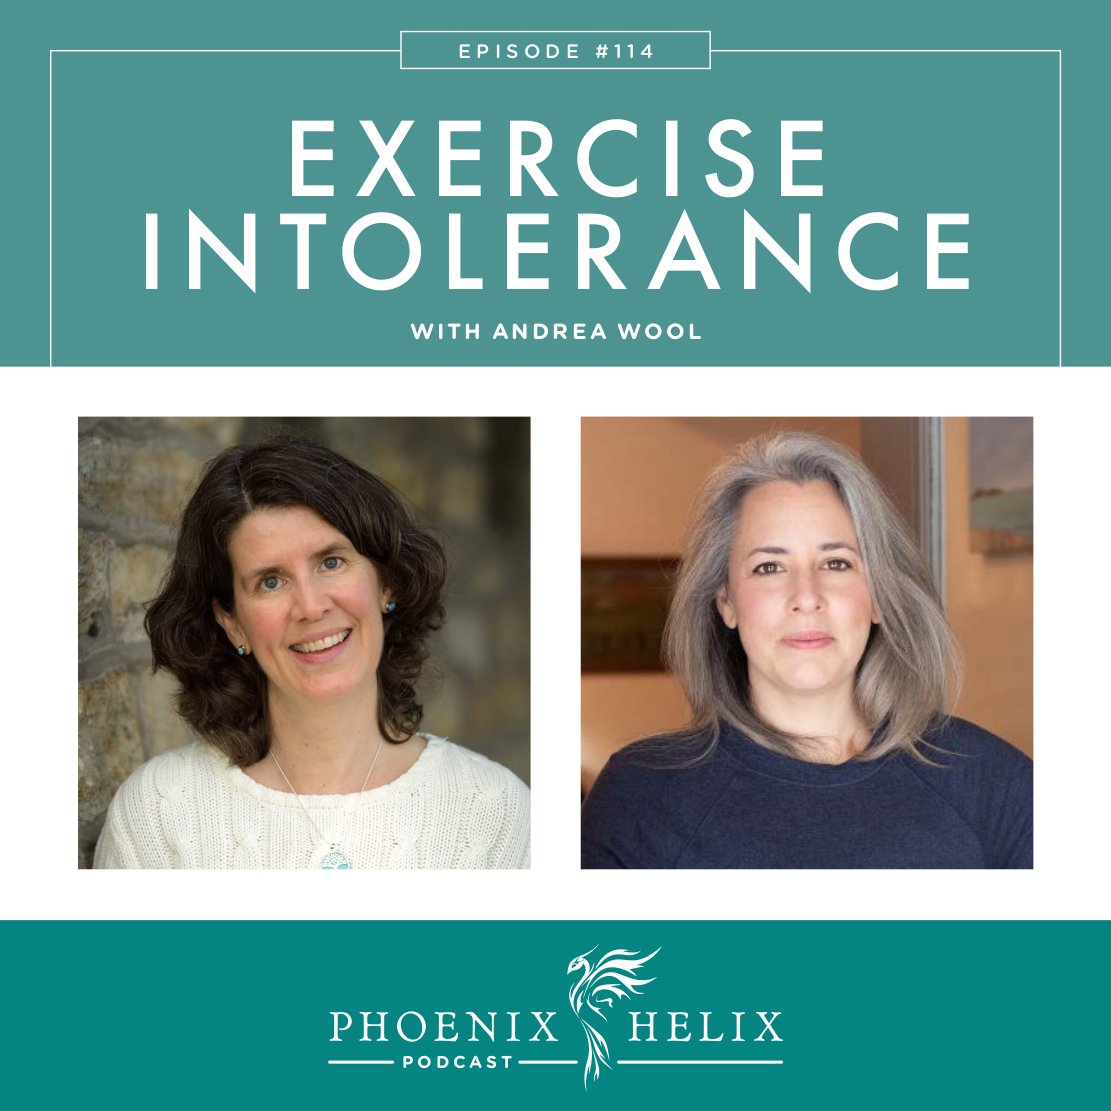 Best of the Phoenix Helix Podcast: Exercise Intolerance with Andrea Wool